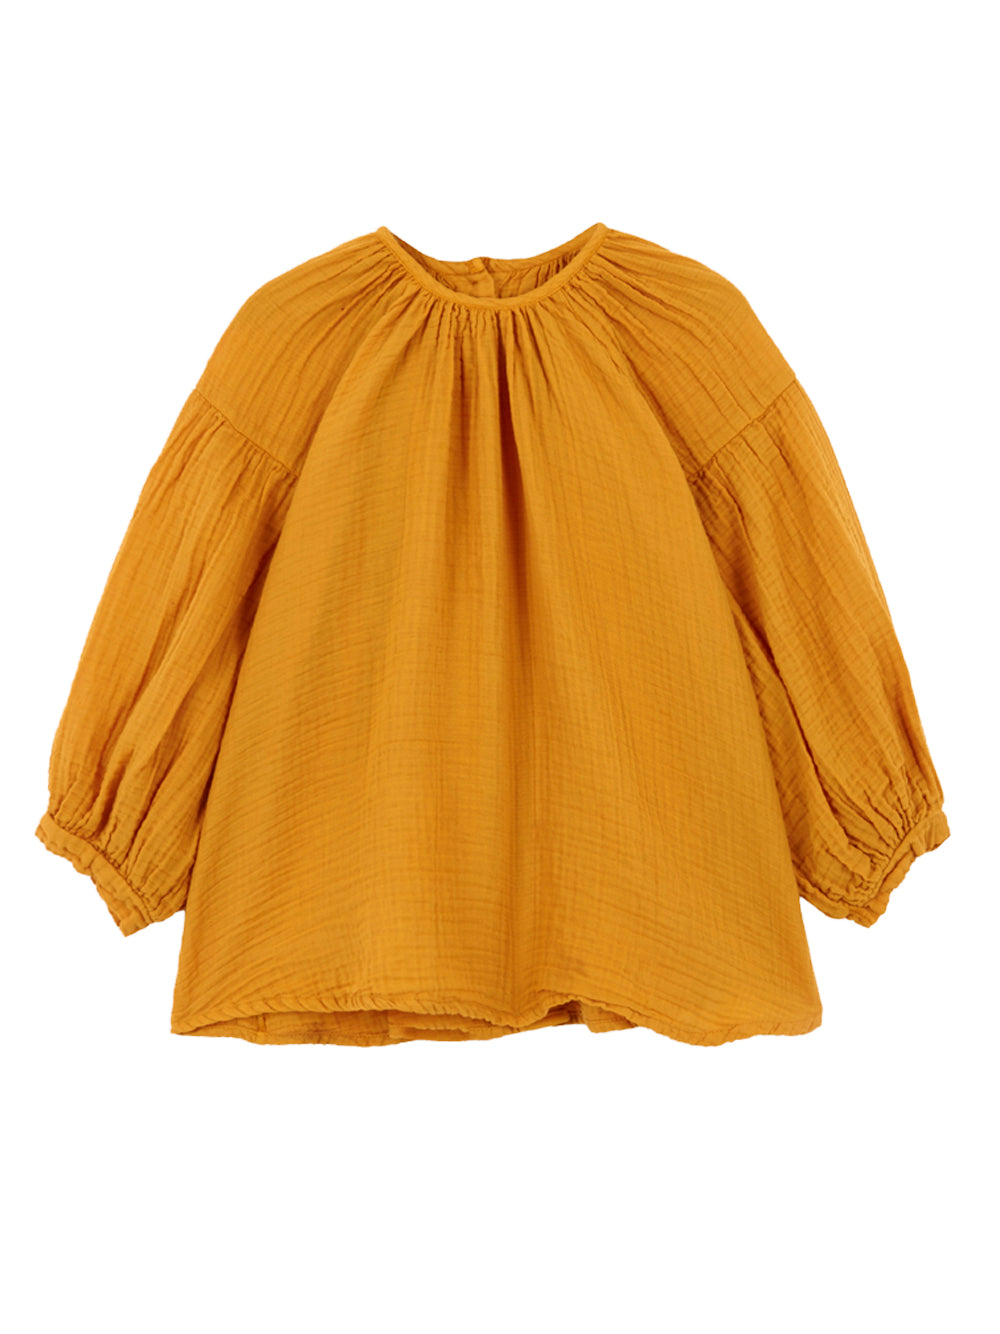 Baby All-Time Orange Blouse